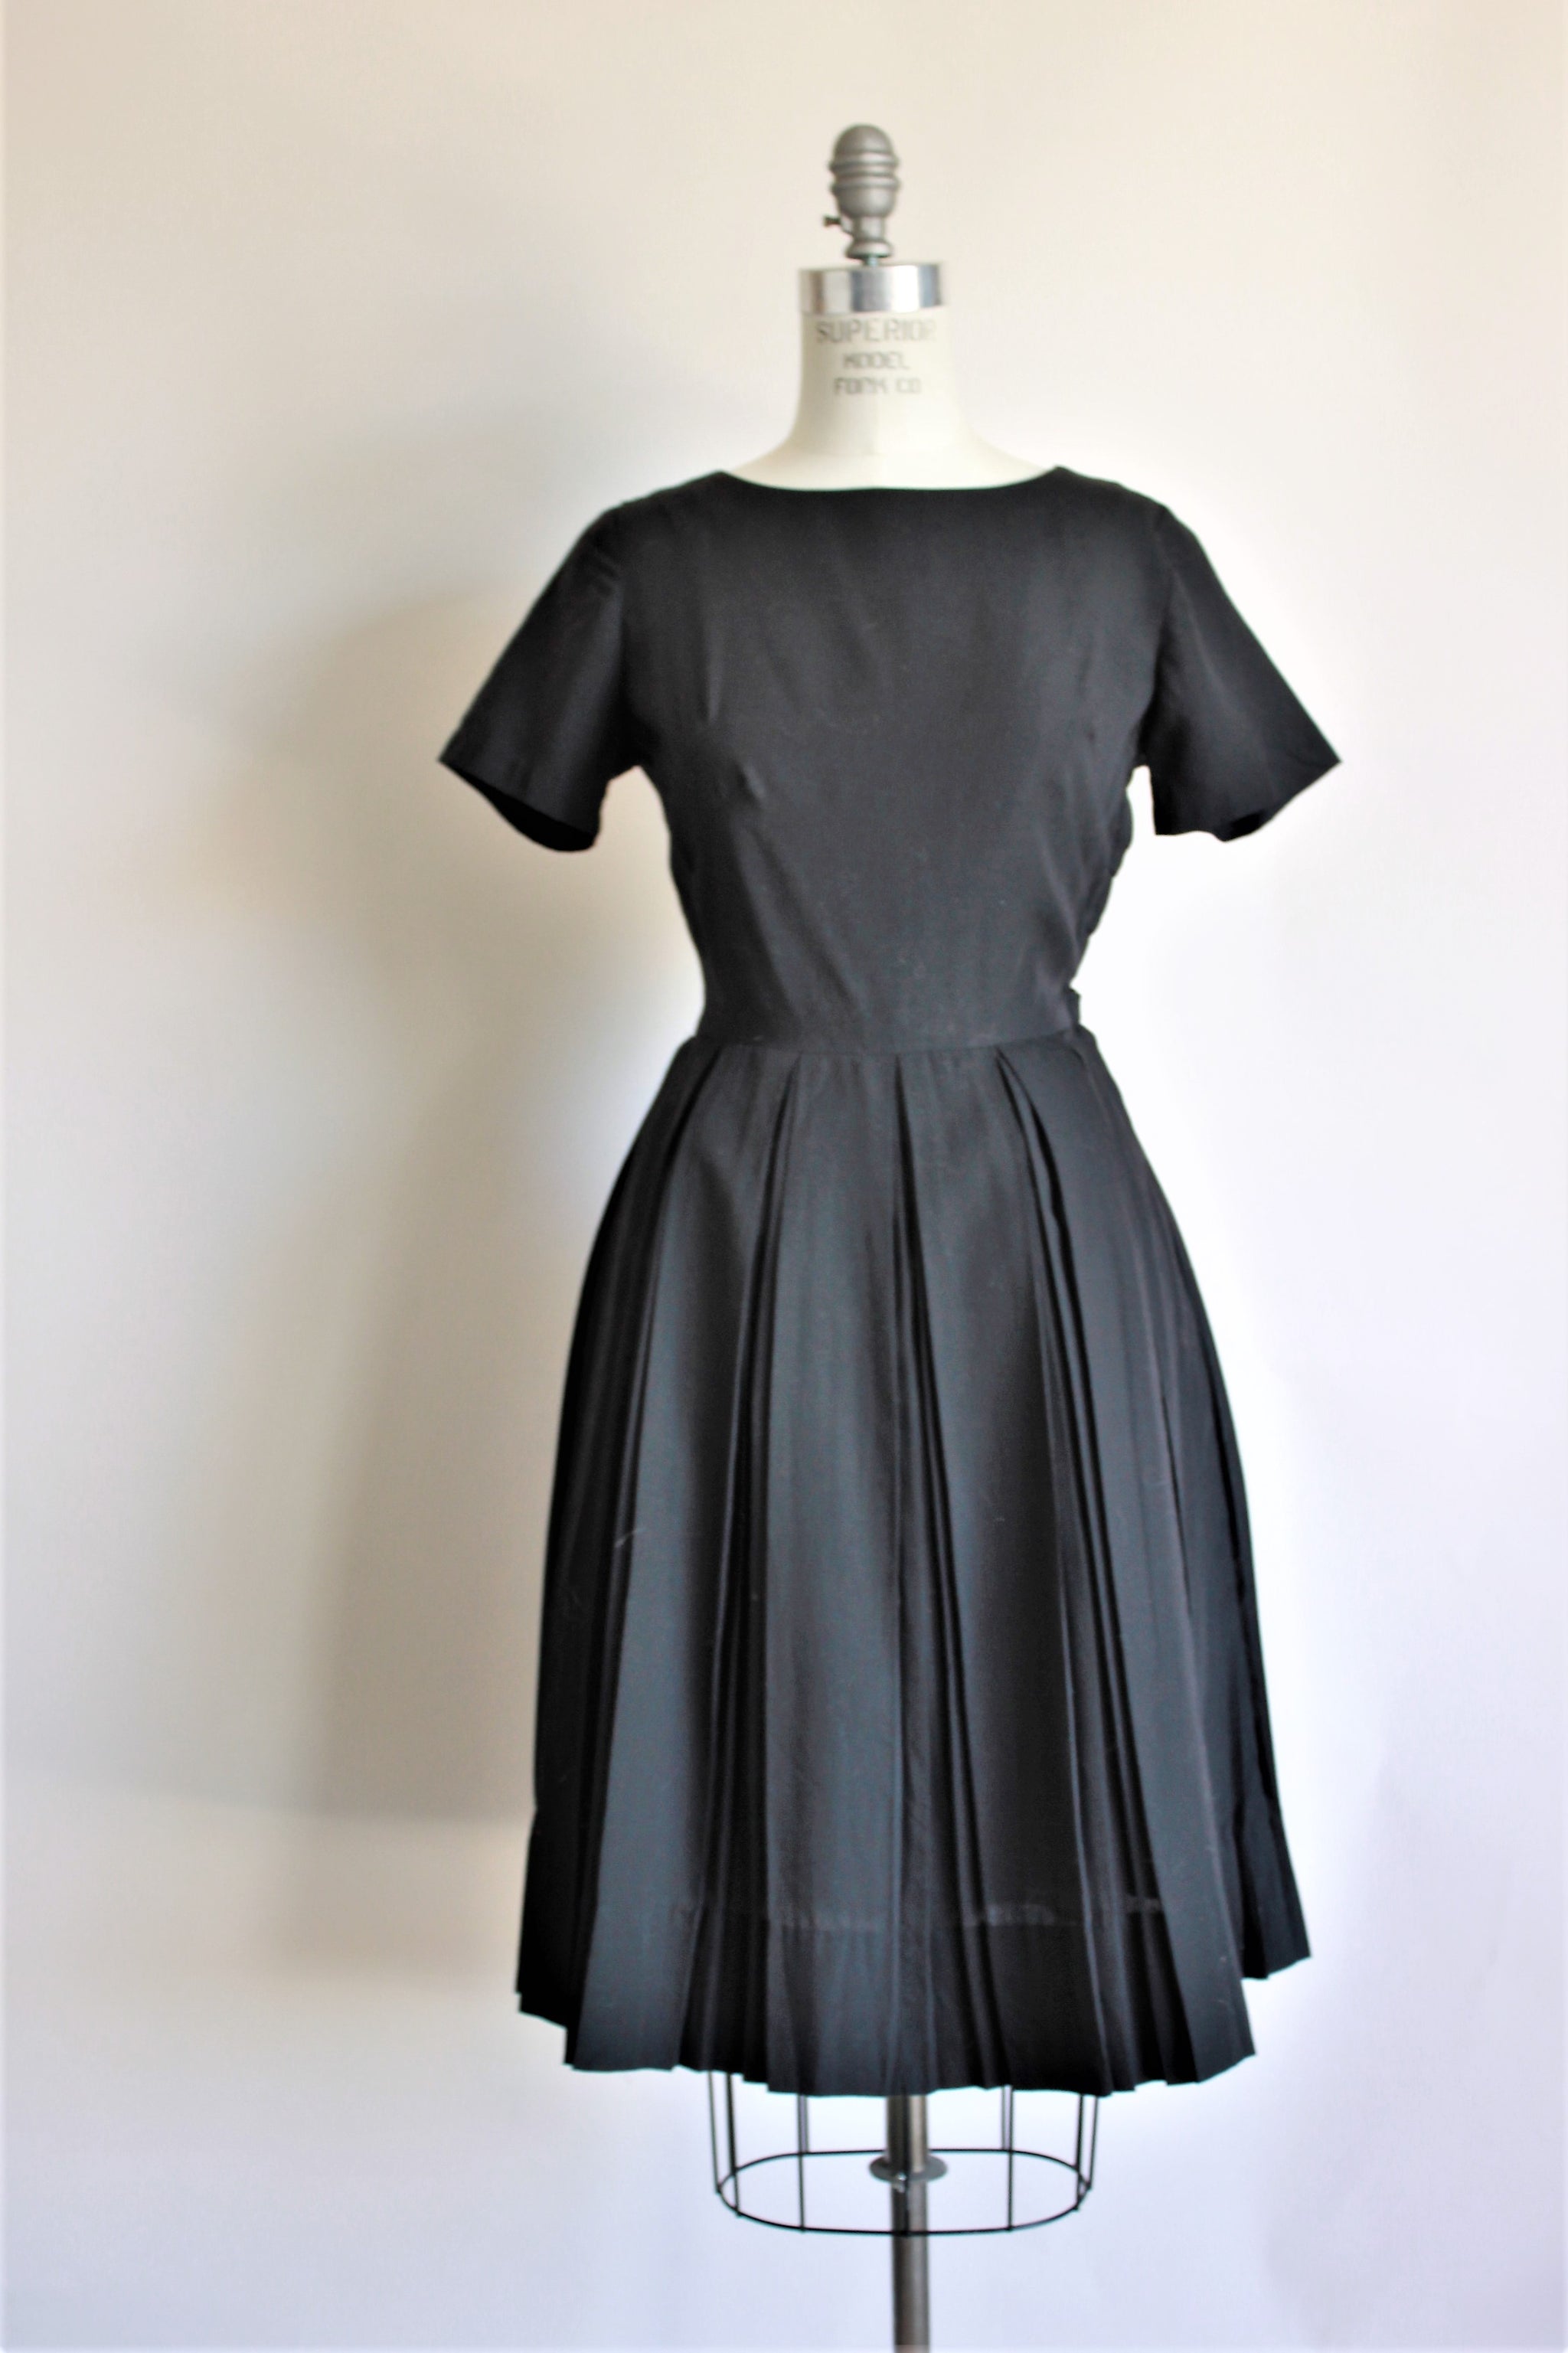 Vintage 1950s Black Fit And Flare Dress by Kay Windsor - Toadstool Farm ...